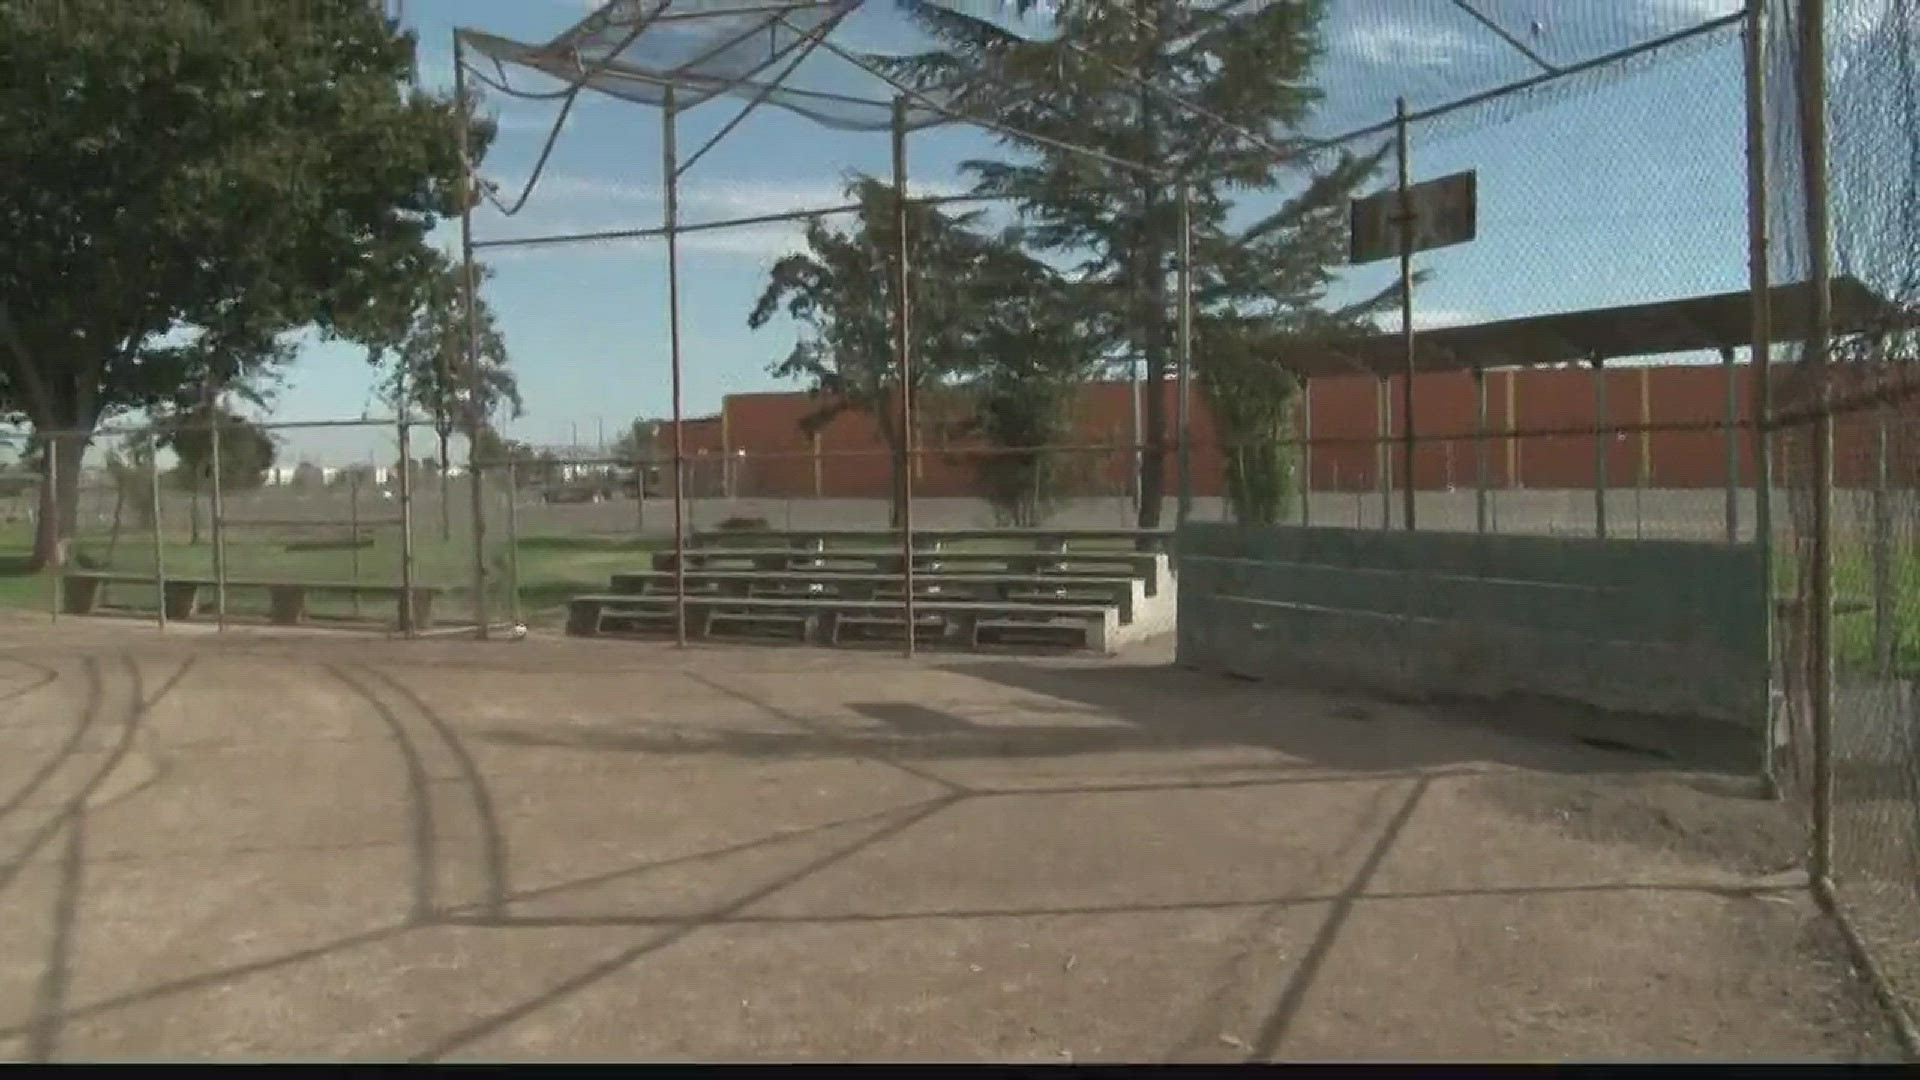 What would you do with $100,000? That's what the City of Stockton is asking people regarding how to improve one of the city's largest parks.